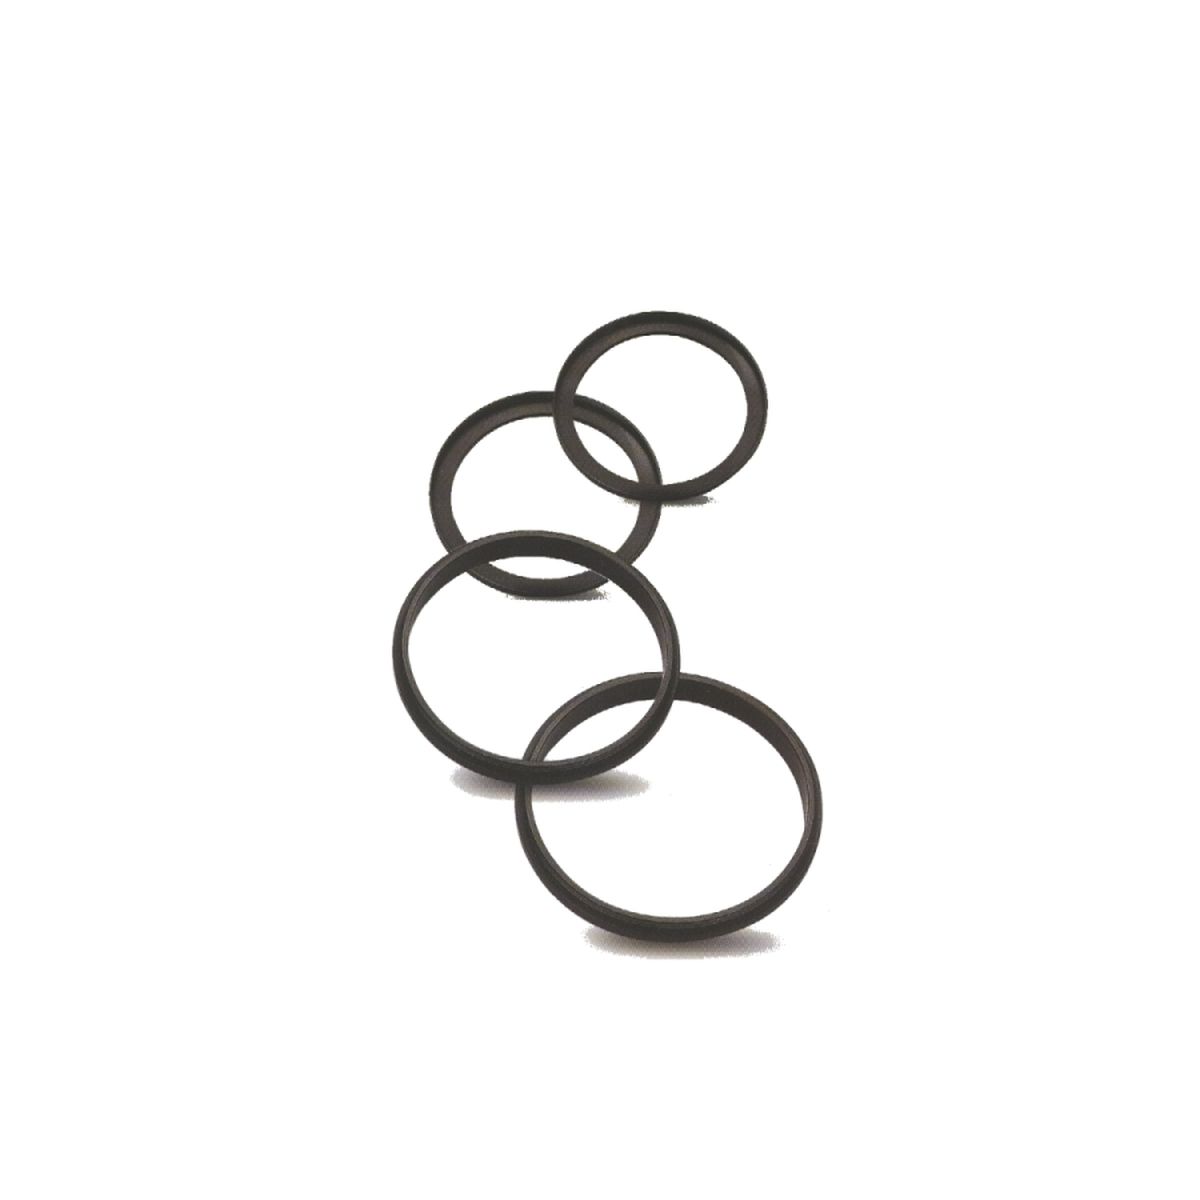 Caruba Step-up/down Ring 37mm - 30.5mm